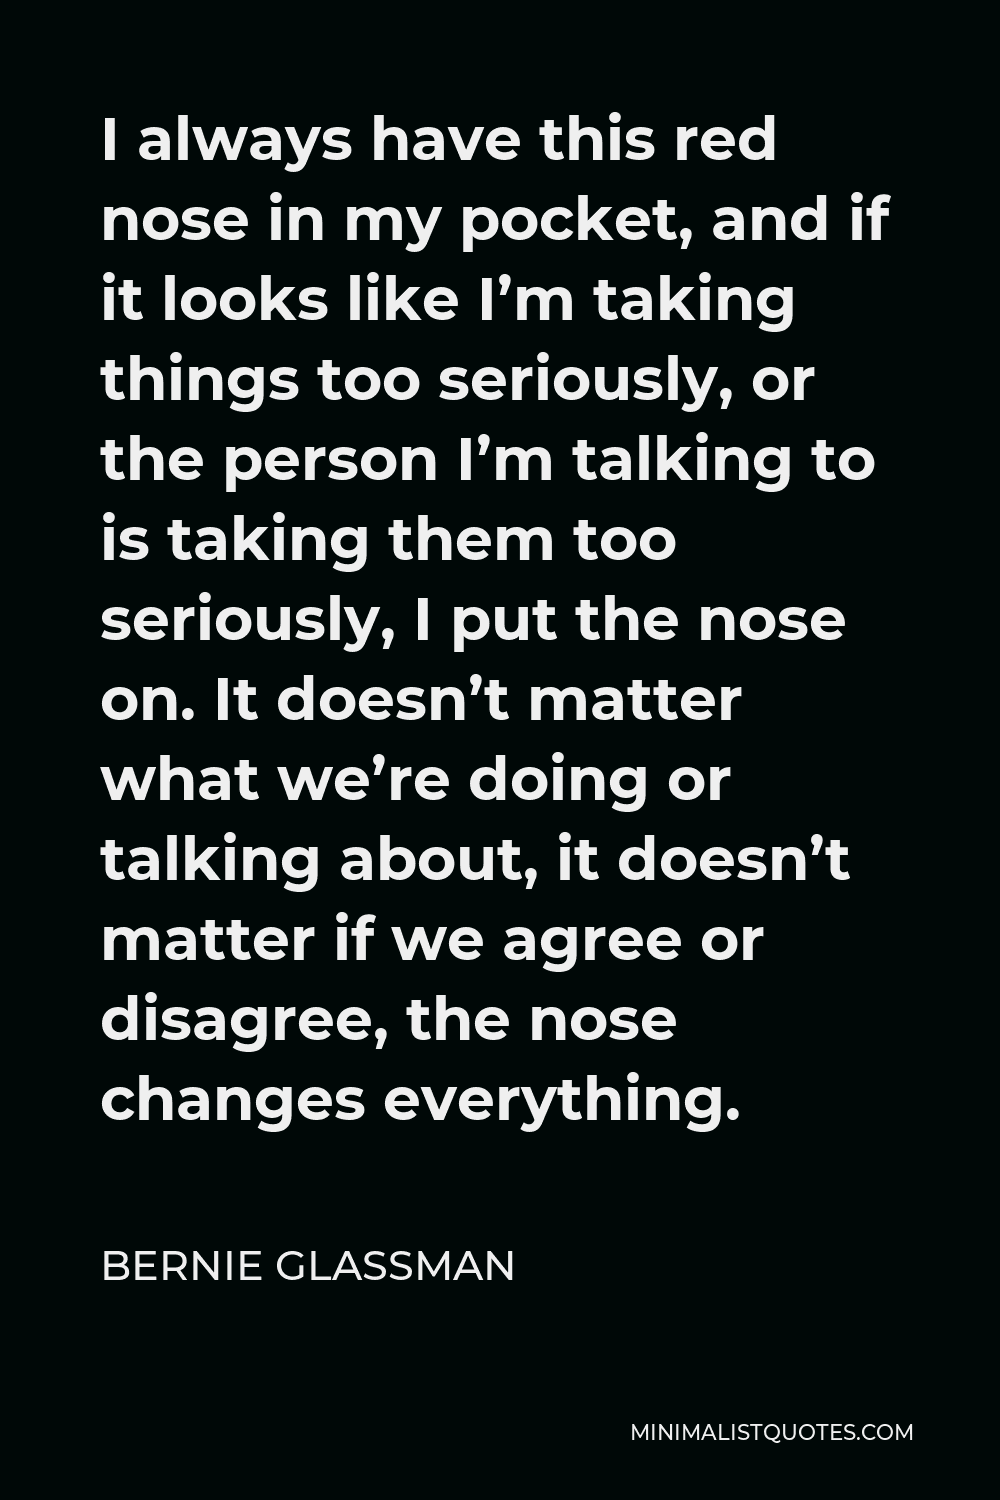 Bernie Glassman Quote - I always have this red nose in my pocket, and if it looks like I’m taking things too seriously, or the person I’m talking to is taking them too seriously, I put the nose on. It doesn’t matter what we’re doing or talking about, it doesn’t matter if we agree or disagree, the nose changes everything.